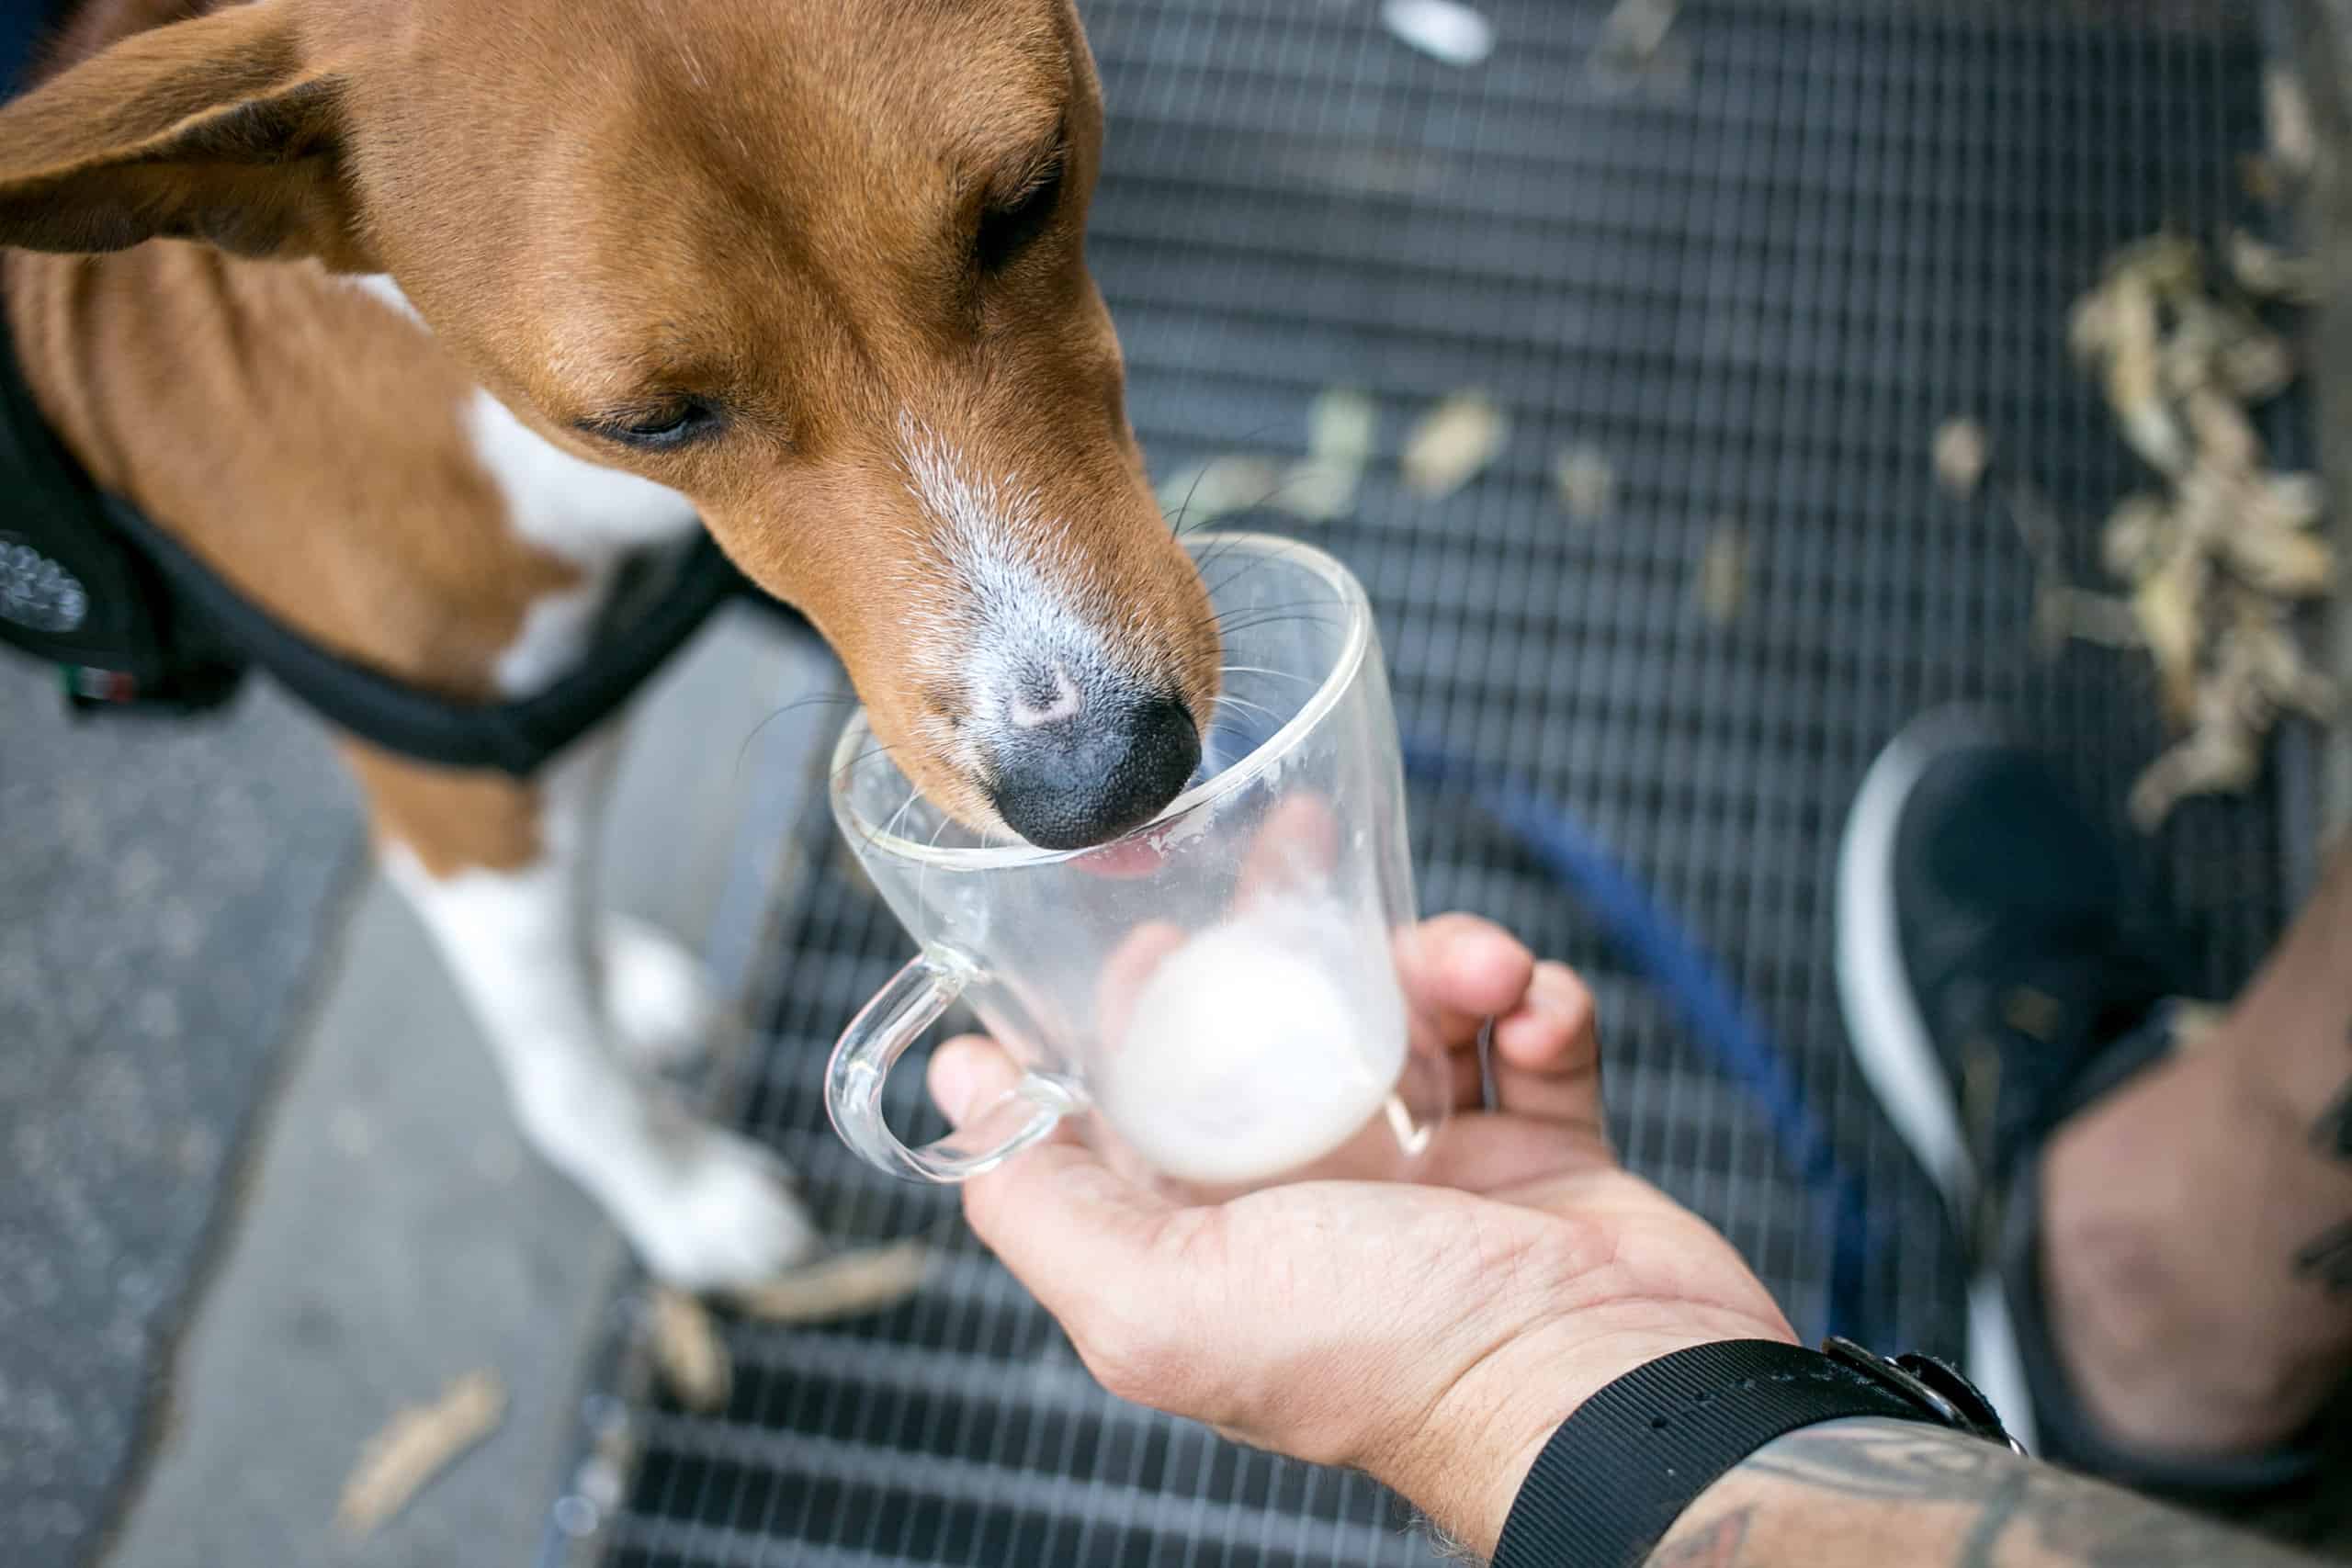 Daily drinking water for dogs